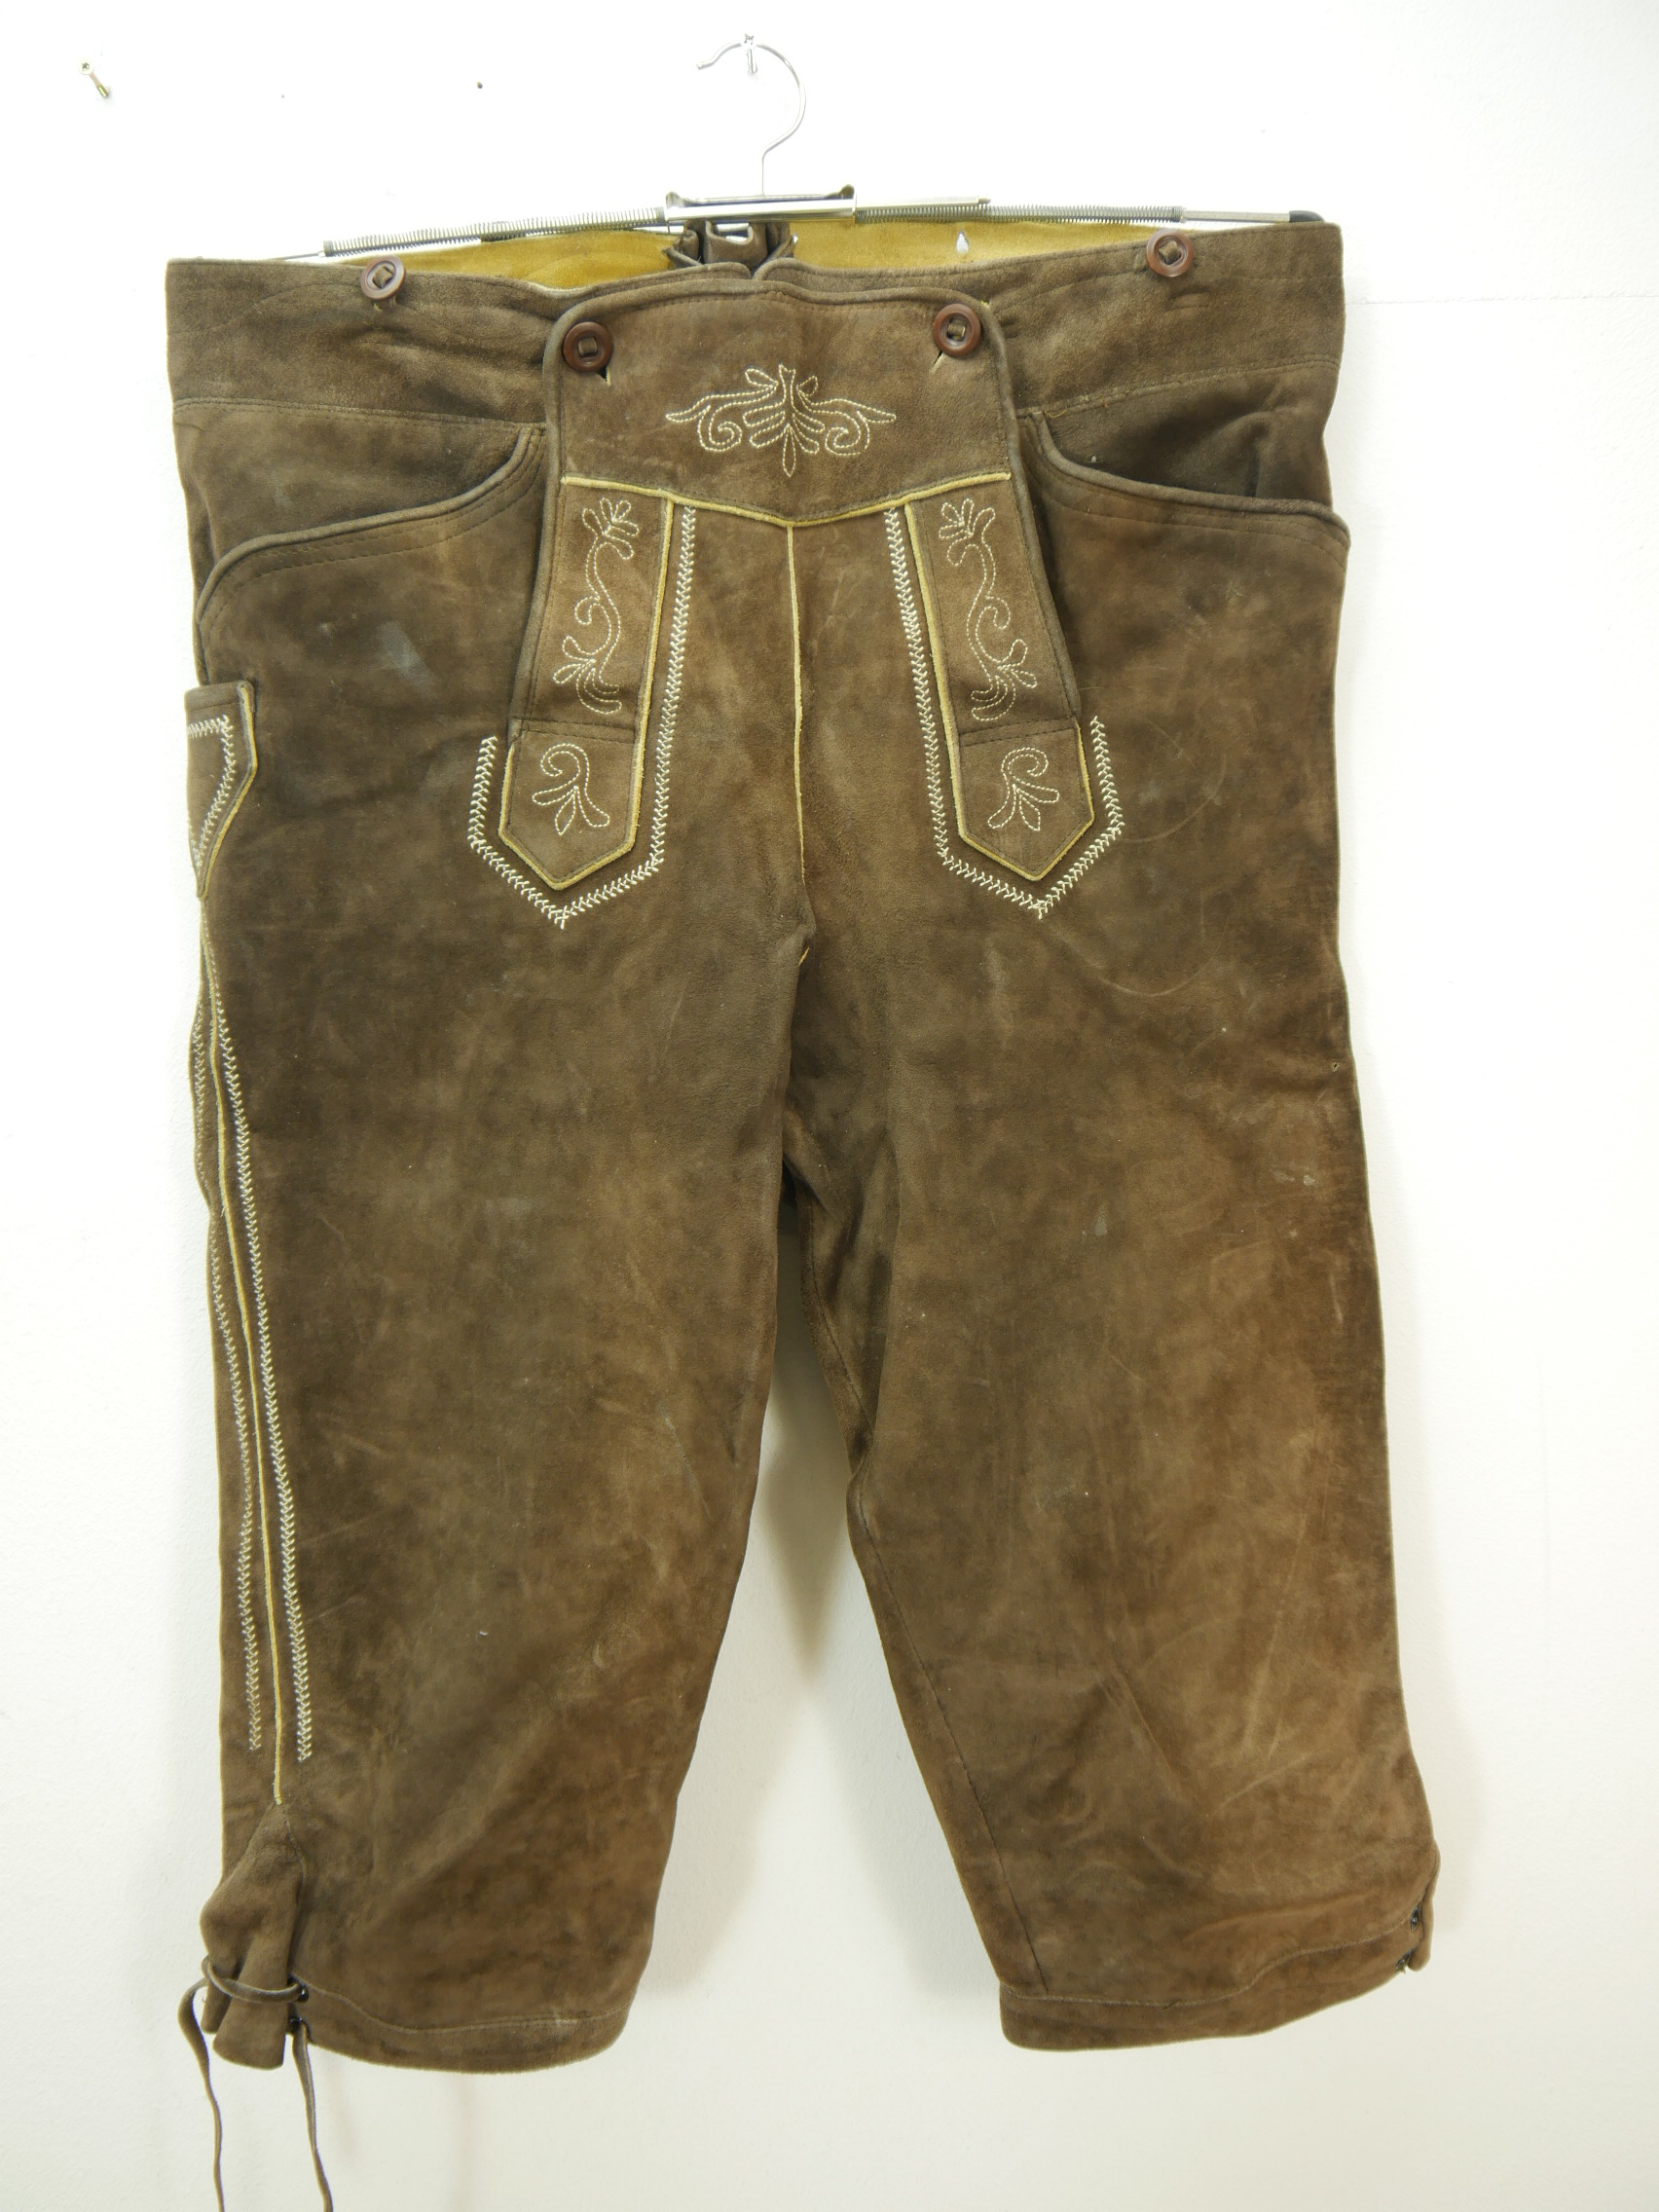 Leather pants by Alphorn with embroidery for leisure and work, brown ...